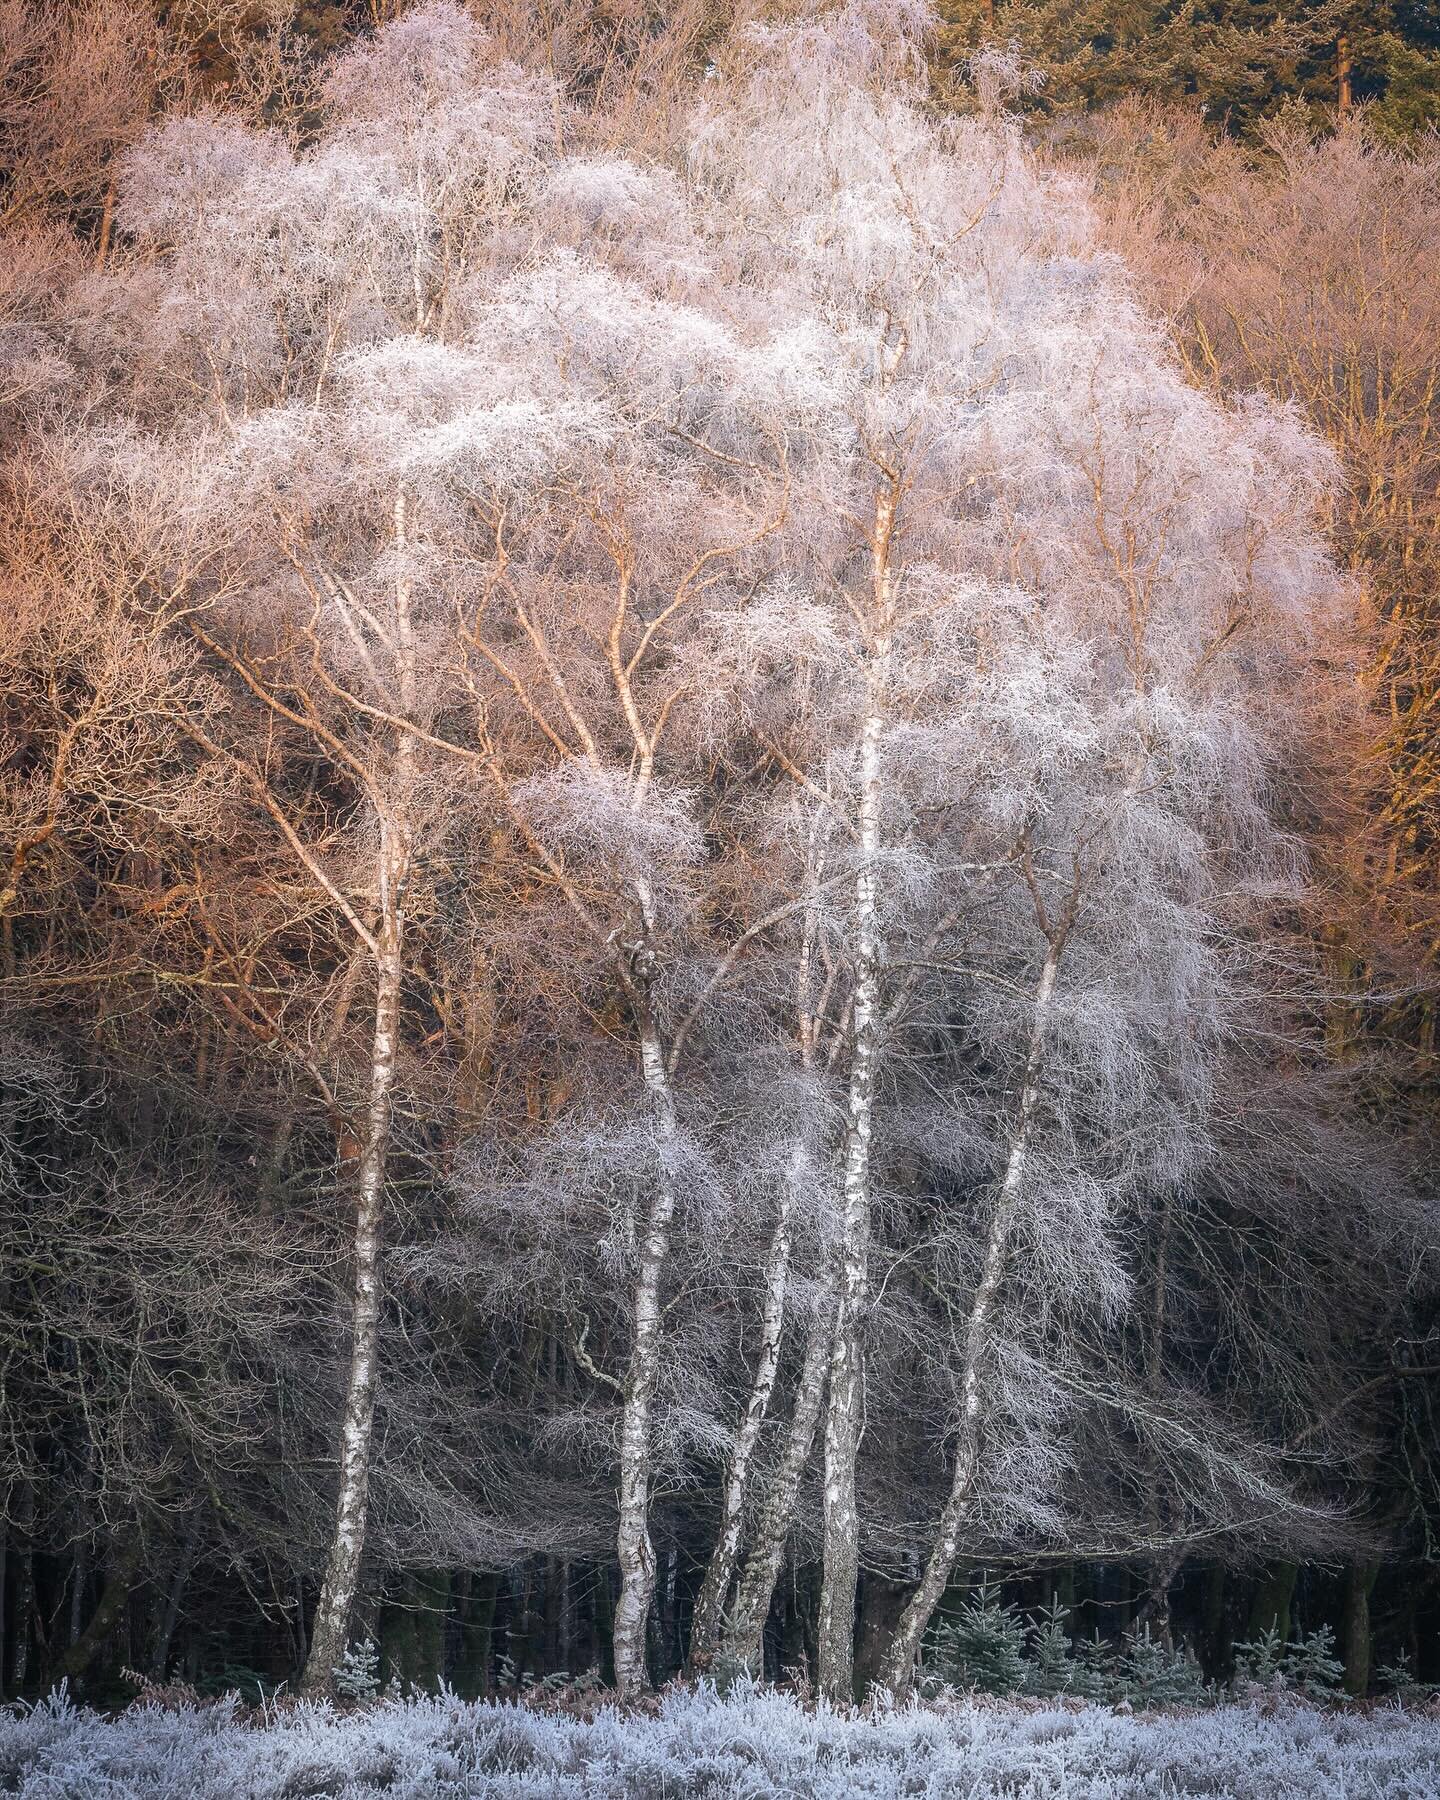 First of all, please excuse the horrible Instagram crop on this image! Secondly what a morning!!!! The warmth vs the cold. The sun vs the ice. As the rest of the first melted from the trees, for some reason it remained on these birch trees fighting a